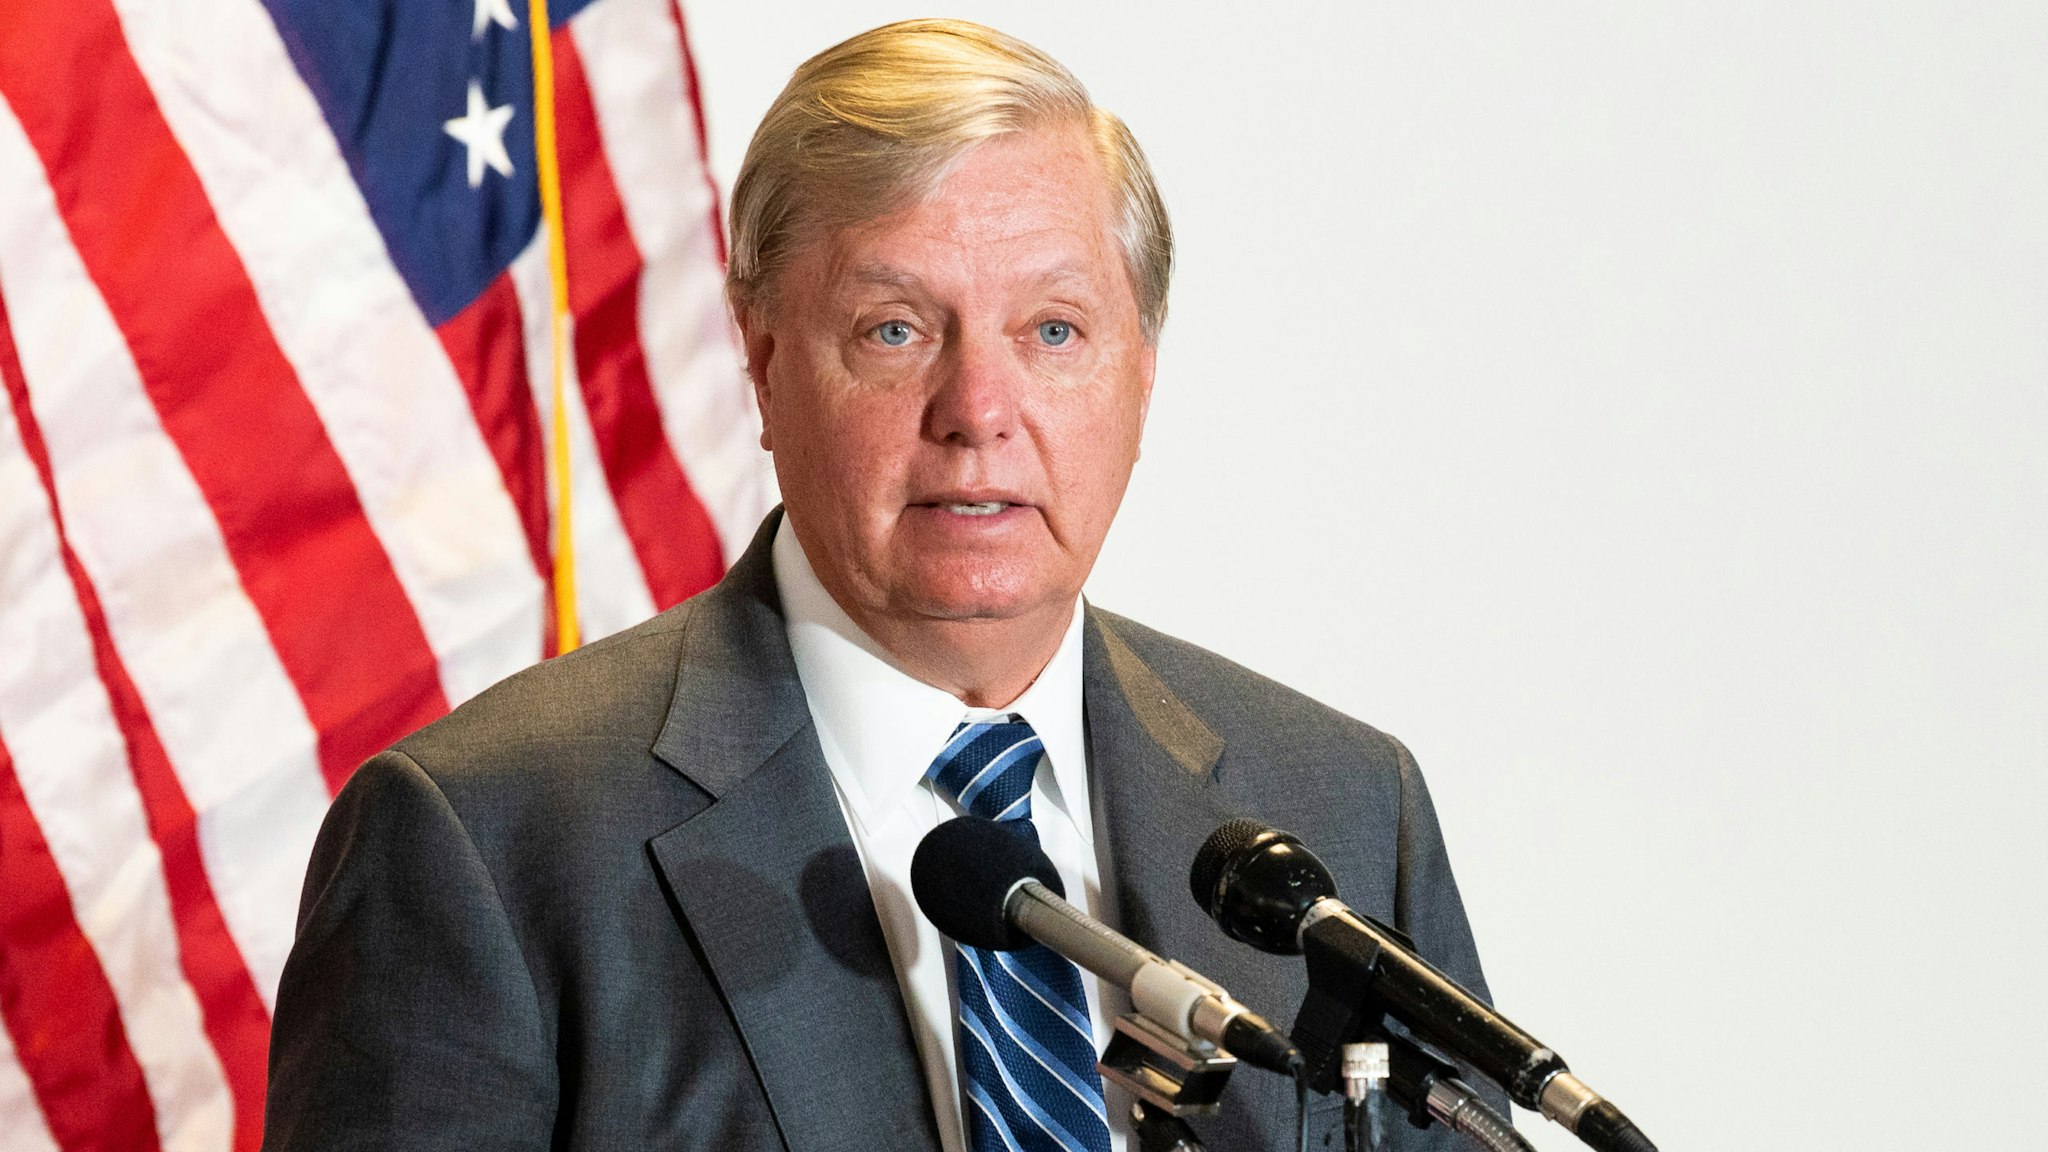 WASHINGTON, UNITED STATES - MAY 12, 2020: U.S. Senator Lindsey Graham (R-SC) speaks to the media on his way to the Republican caucus launch.